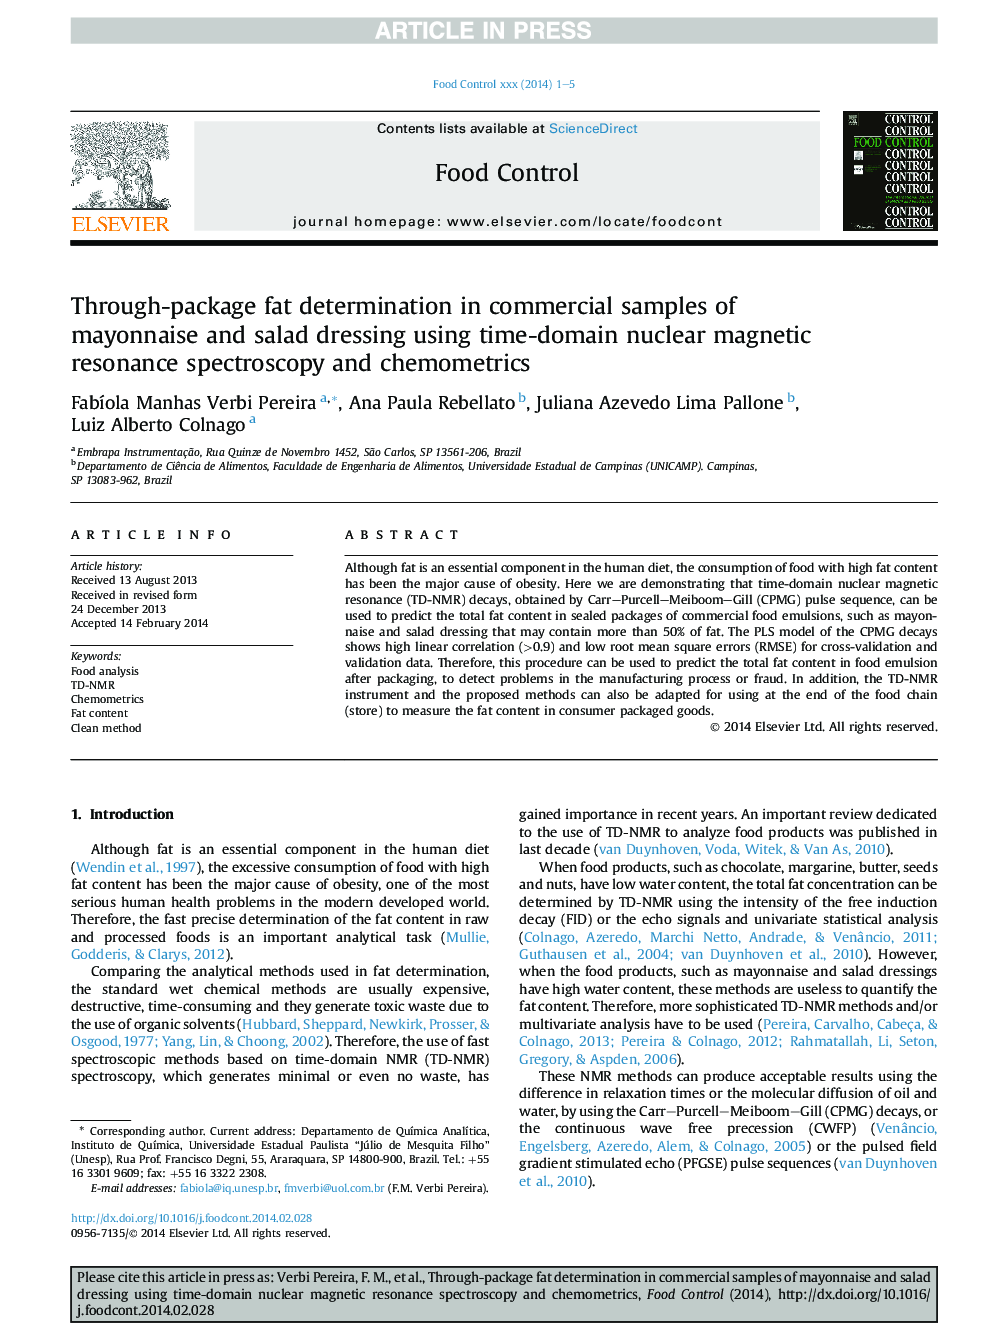 Through-package fat determination in commercial samples of mayonnaise and salad dressing using time-domain nuclear magnetic resonance spectroscopy and chemometrics